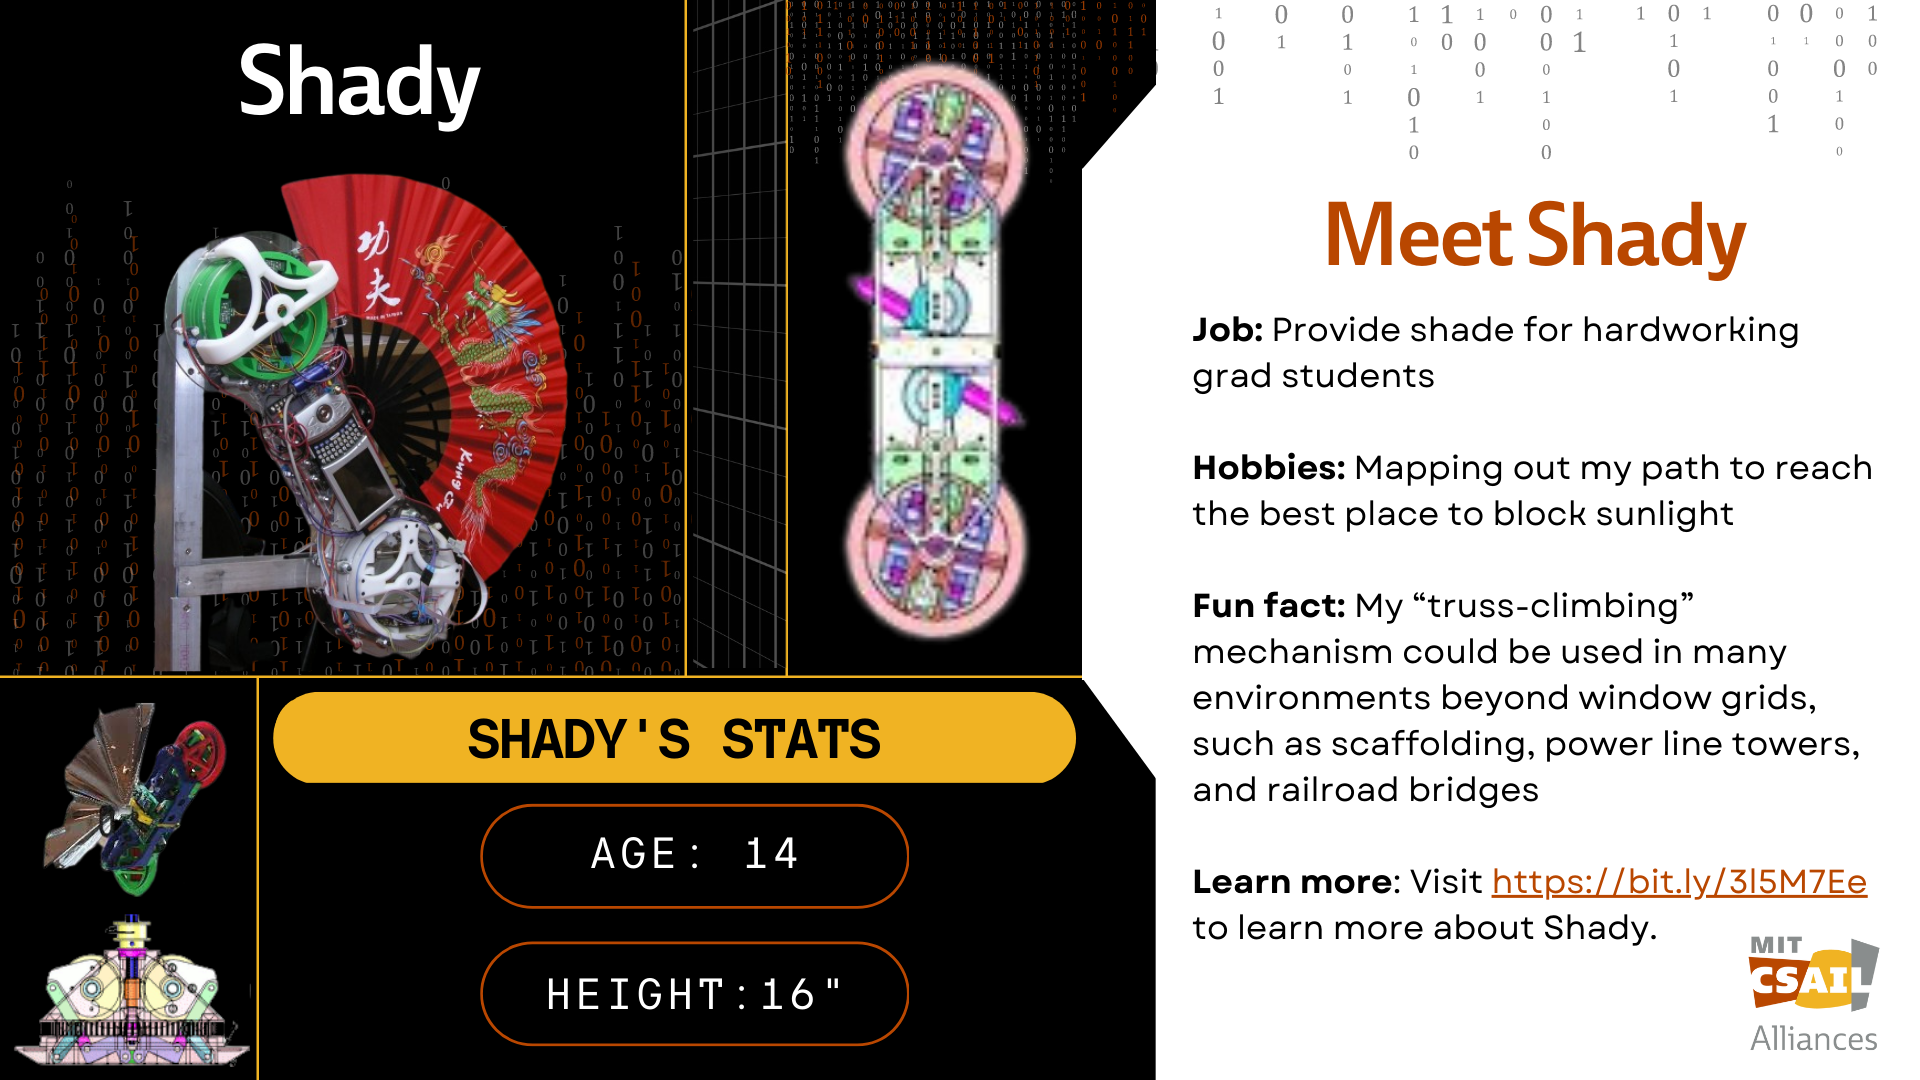 Photo collage of the robot Shady; with text that reads "Shady"